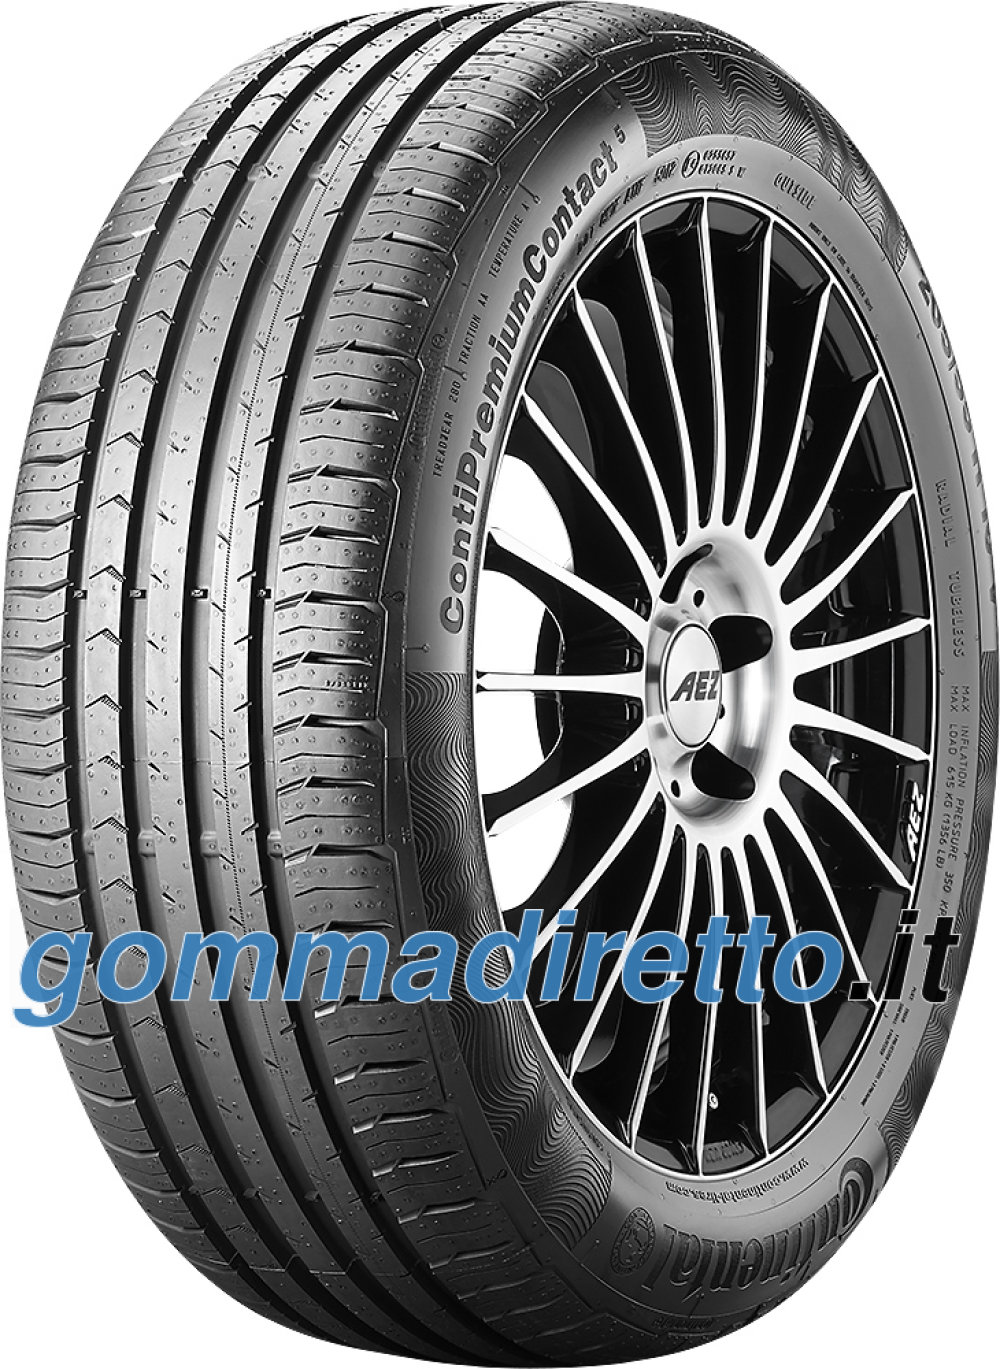 Image of Continental ContiPremiumContact 5 ( 185/65 R15 88H )